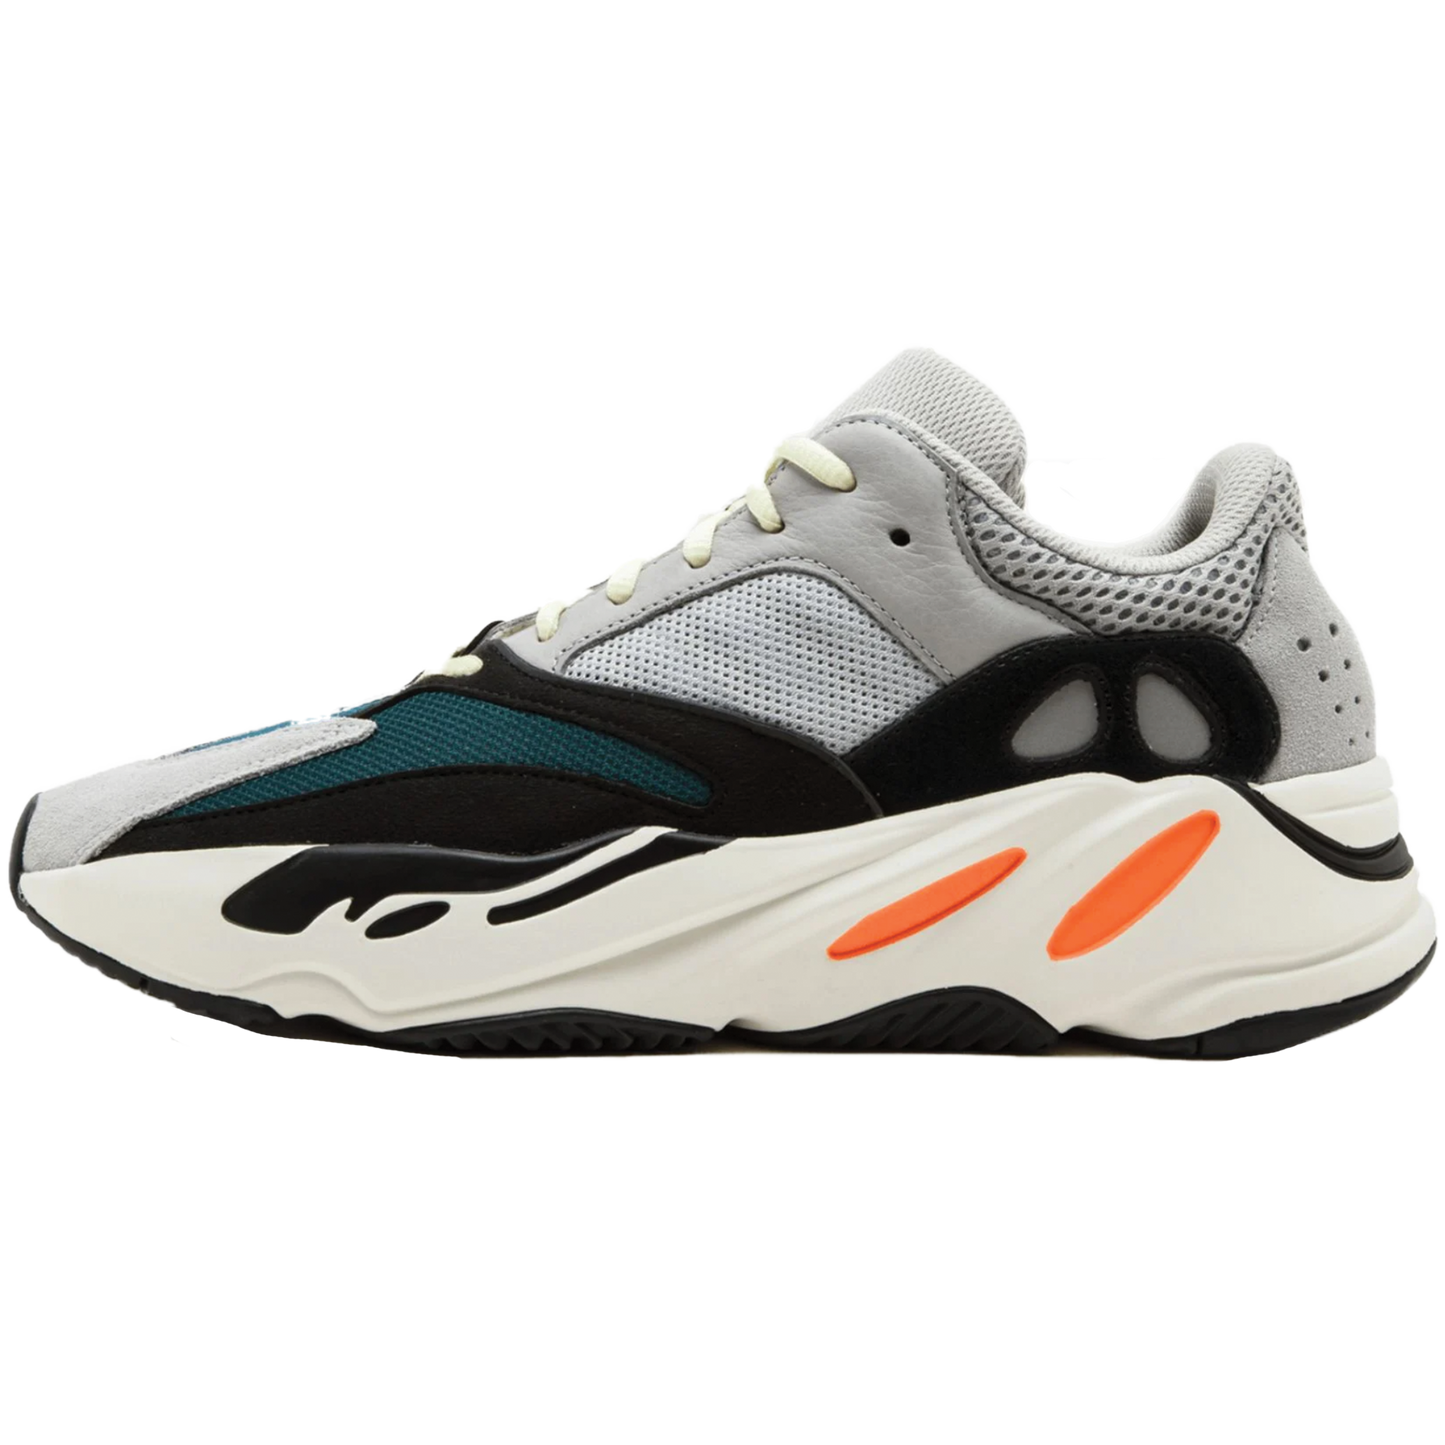 Yeezy 700 Boost Wave Runner (USED)